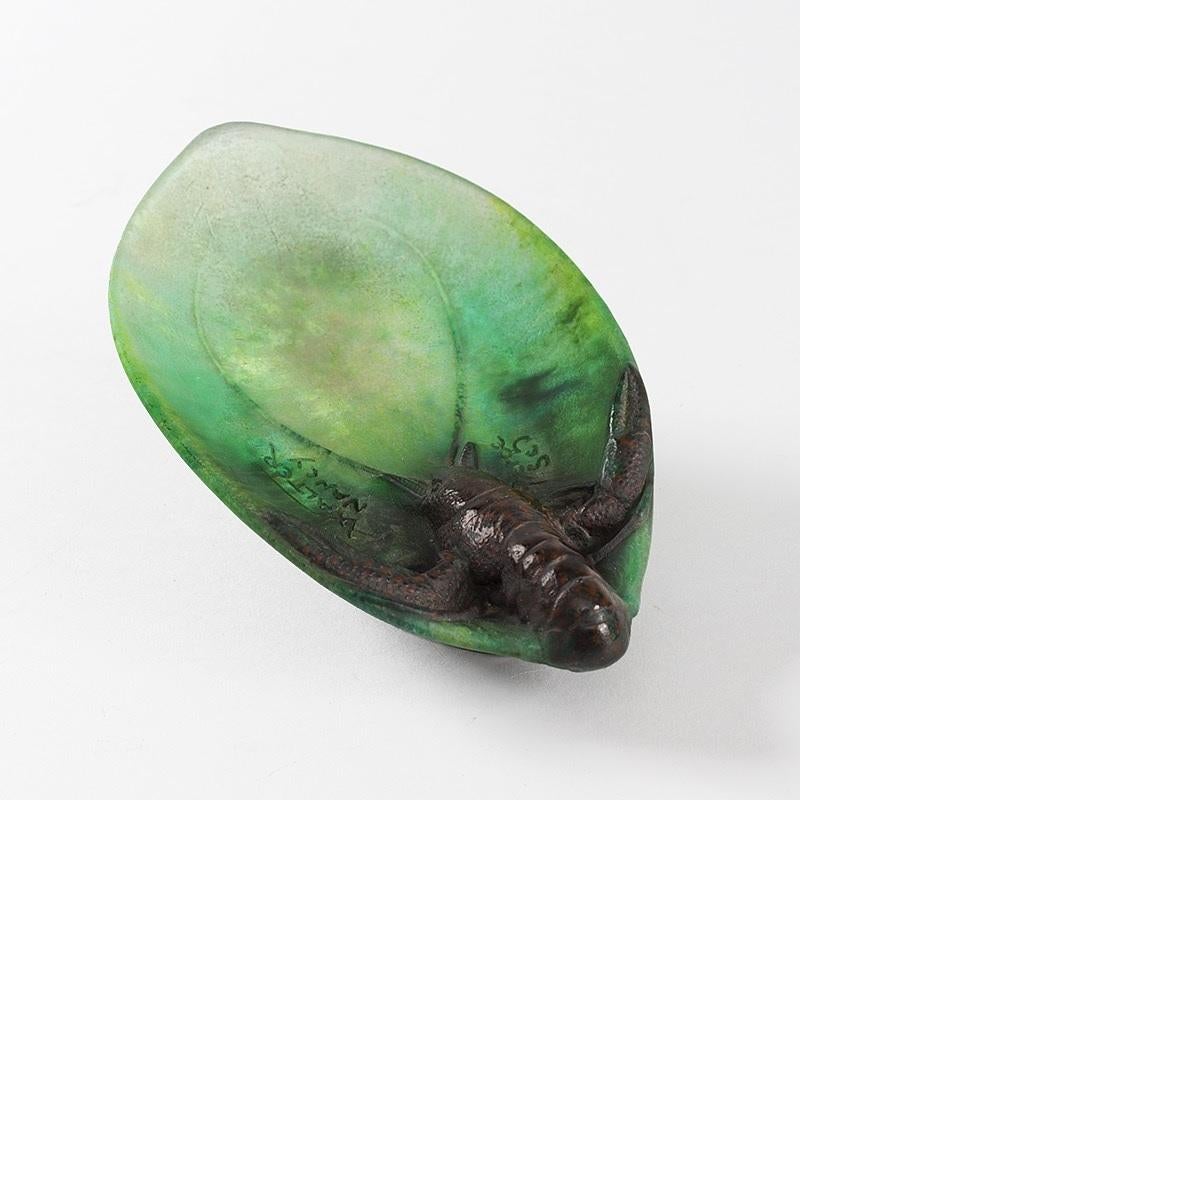 A French Art Nouveau pâte de verre vide-poche by Amalric Walter and Henri Bergé. This piece features a brown lobster resting on a blue-green shaped dish, circa 1900.

A similar vide-poche is pictured in: Amalric Walter (1870-1959), by Keith